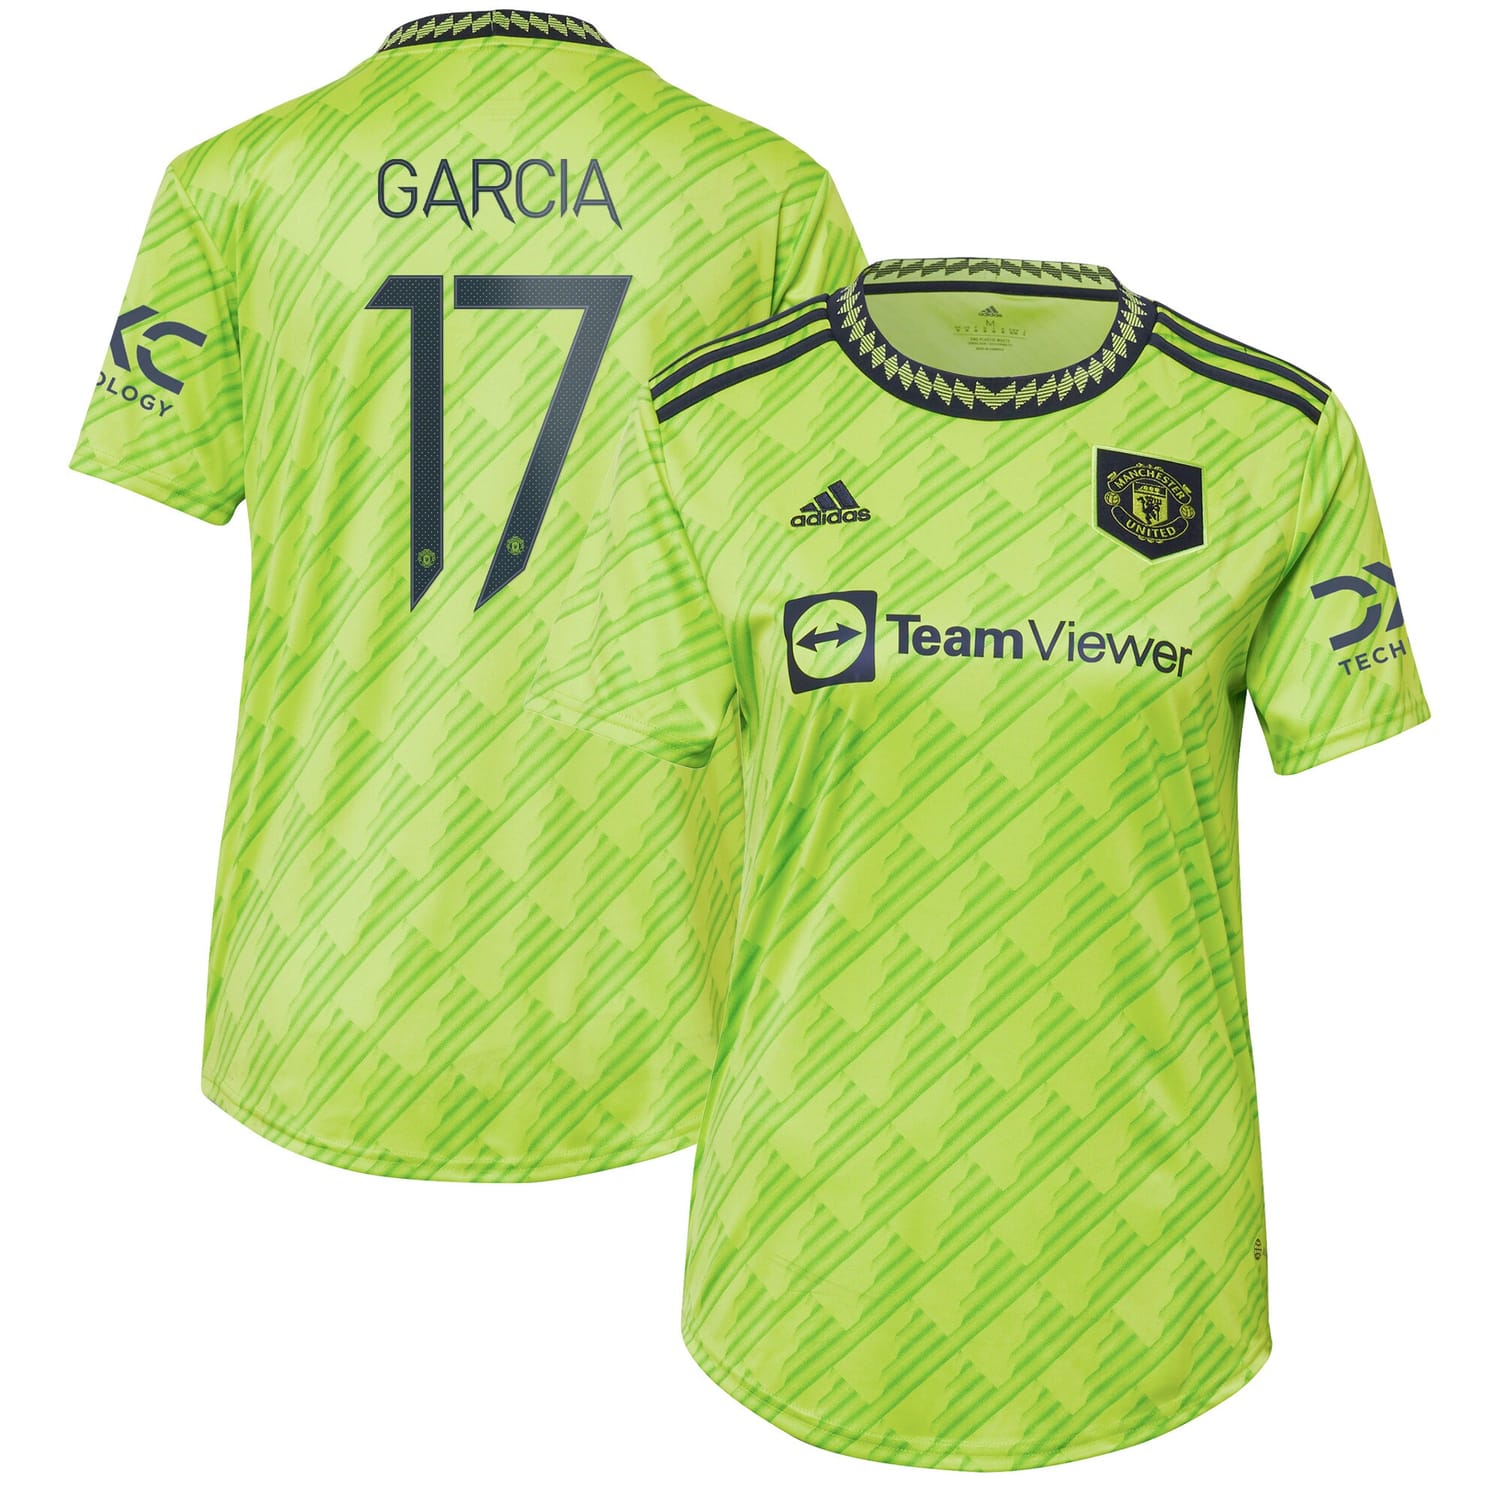 Premier League Manchester United Third Cup Jersey Shirt 2022-23 player Lucia Garcia 17 printing for Women